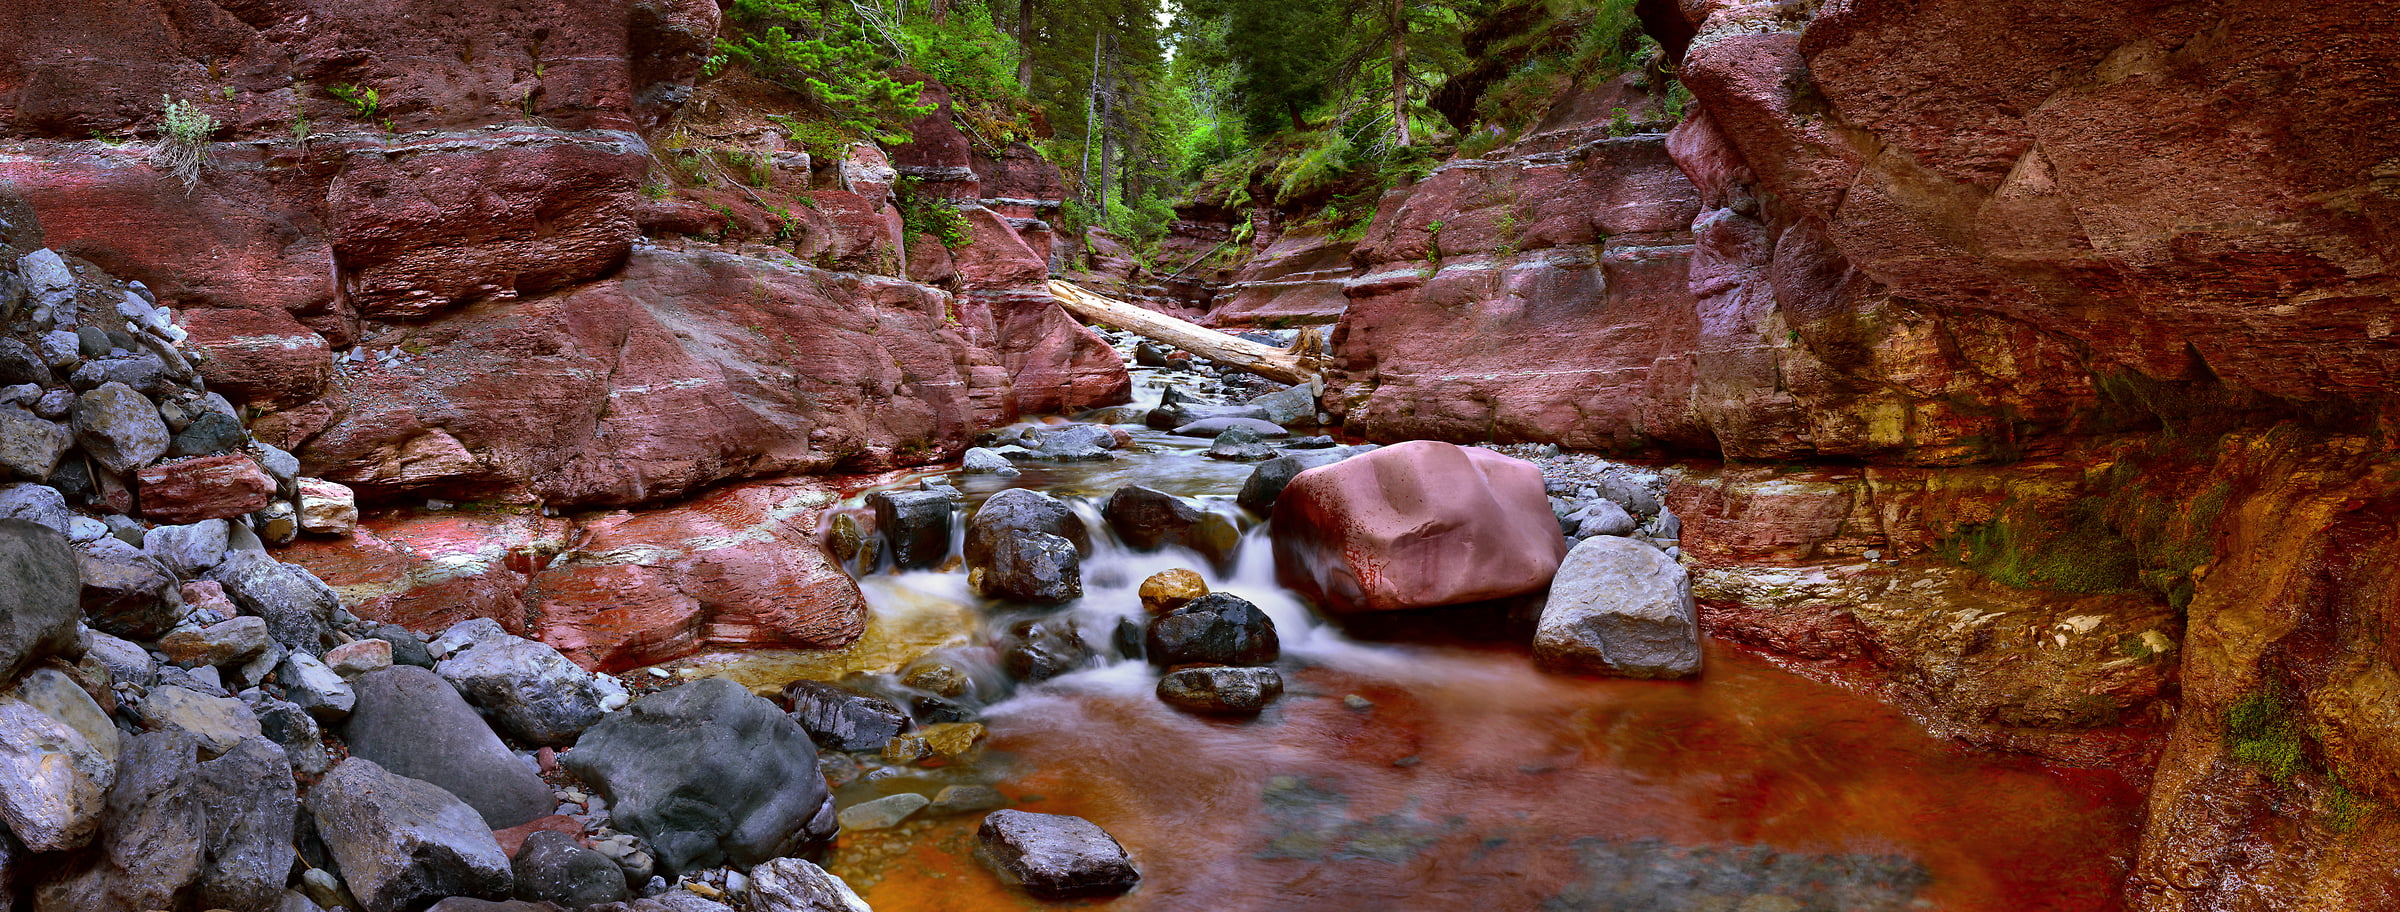 4,741 megapixels! A very high resolution, large-format VAST photo print of a stream, waterfall, and red rocks; fine art nature photo created by Steve Webster in Red Rock Canyon, Waterton Lakes National Park, Alberta Canada